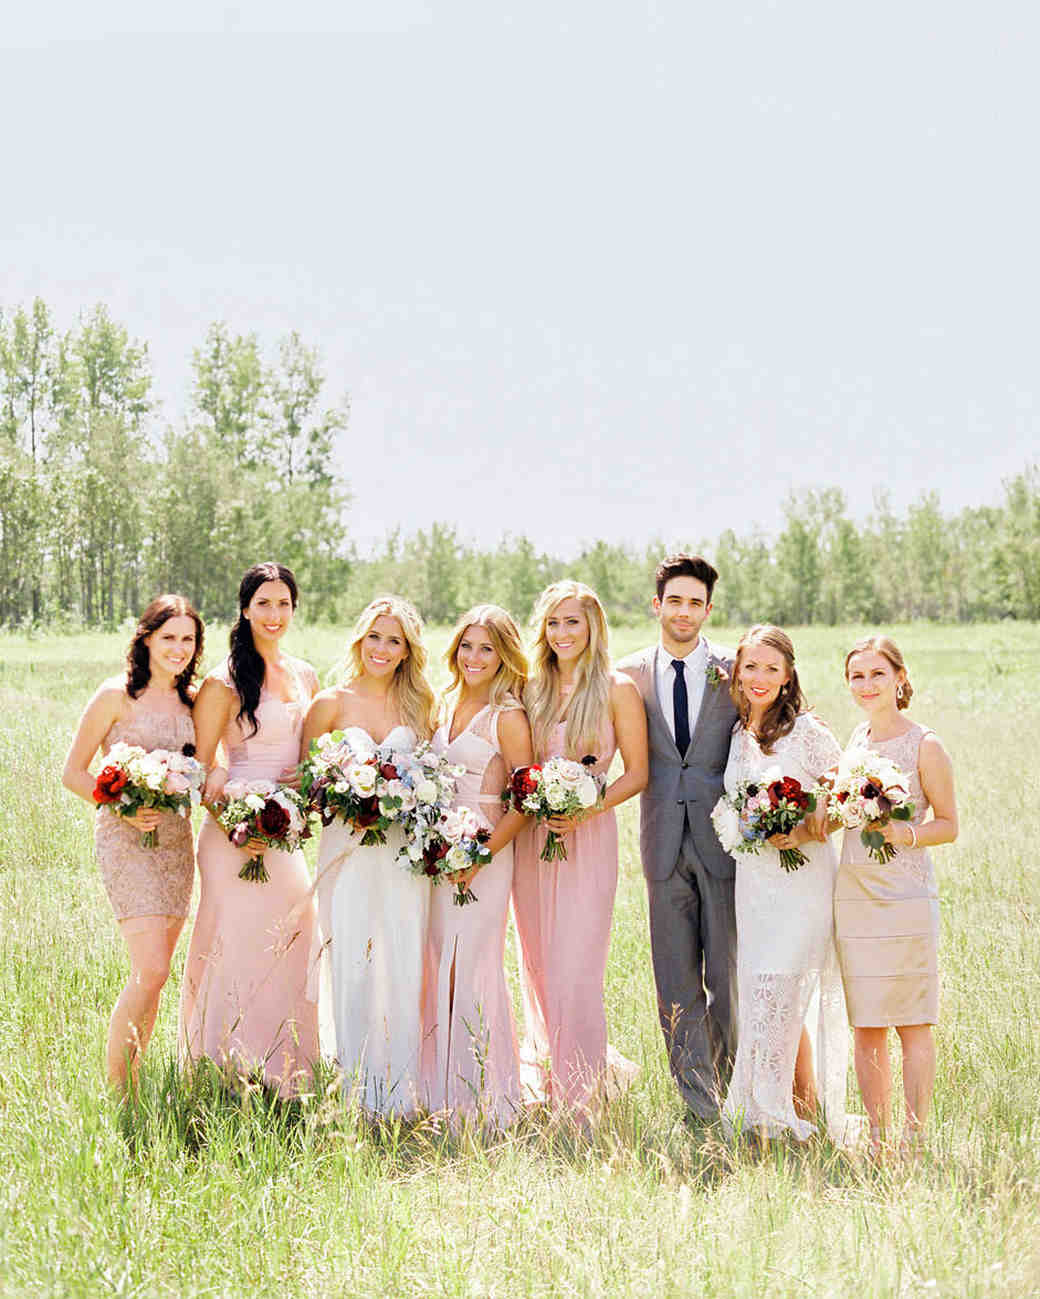 This Beautiful Wedding in Canada Featured One Epic Cake | Martha ...